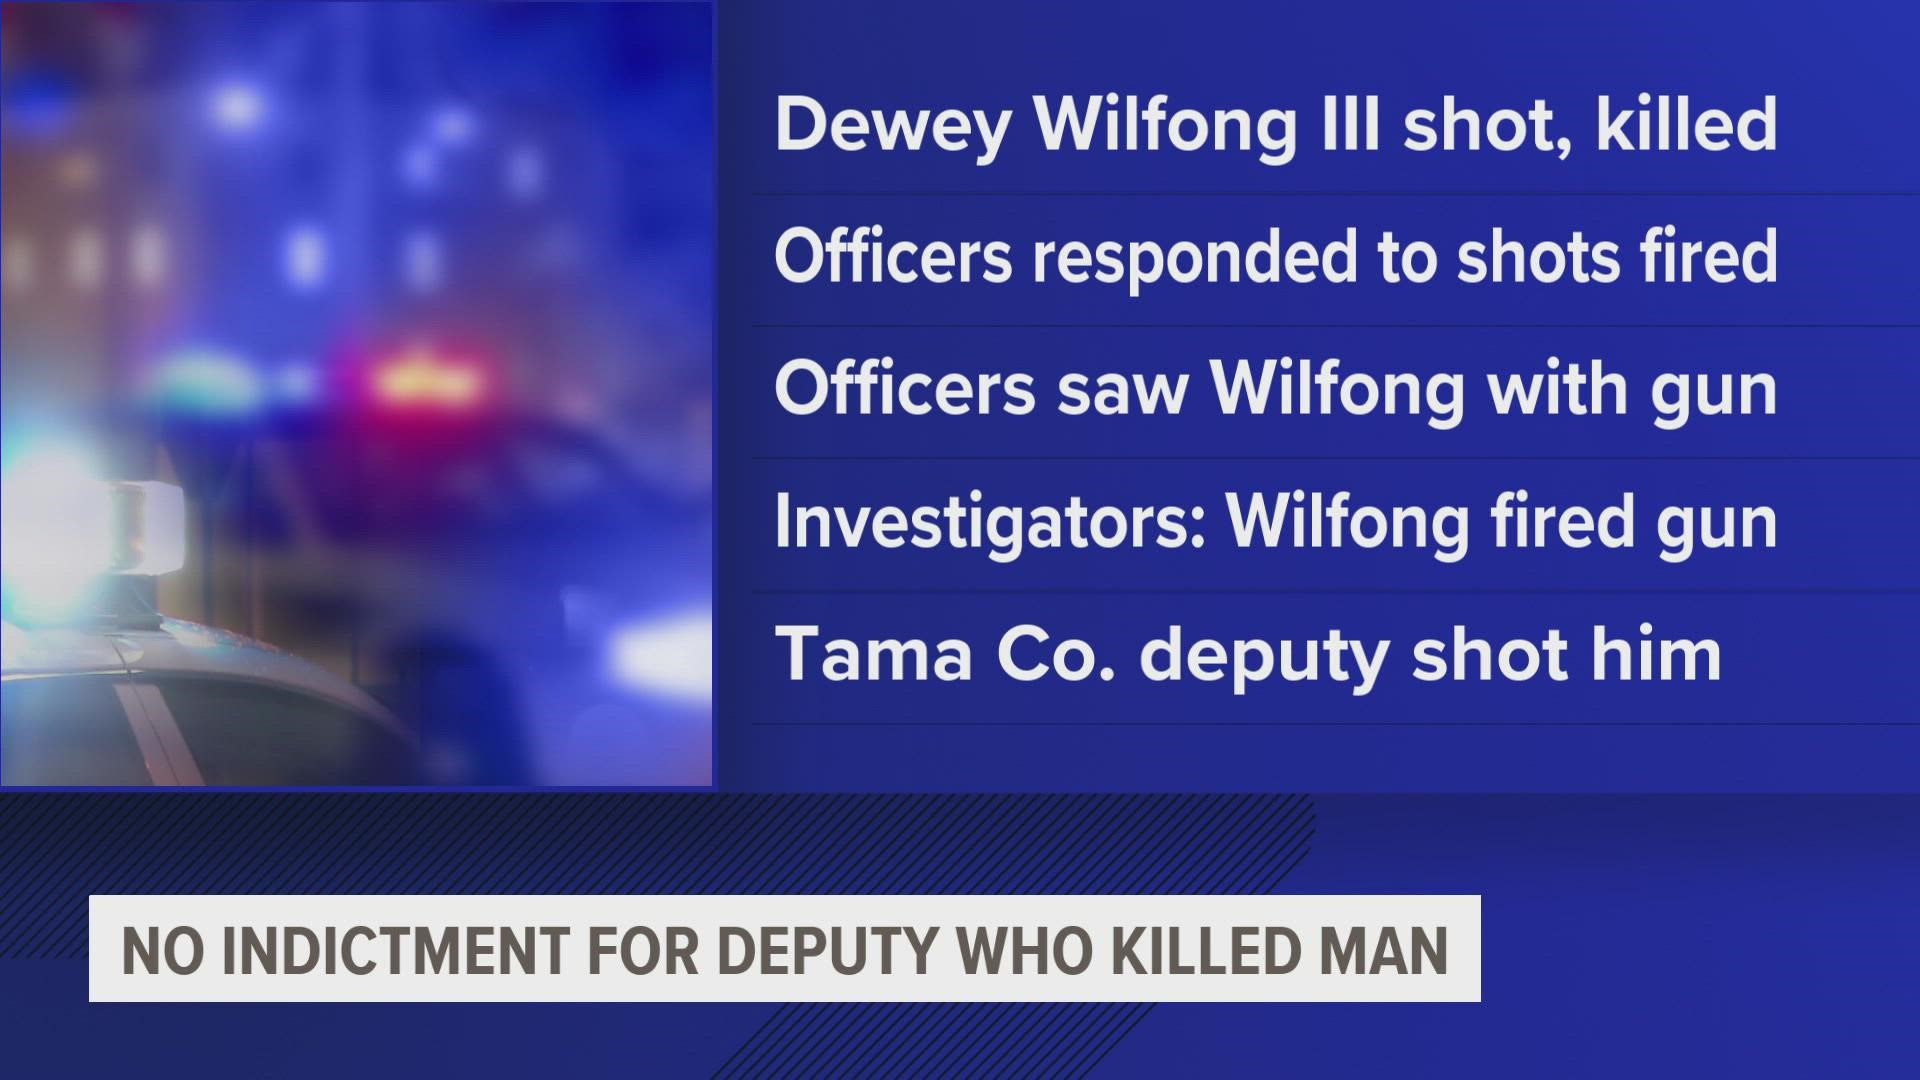 Iowa DPS said in a news release Tuesday the grand jury declined to return an indictment in the shooting that killed 28-year-old Dewey Dale Wilfong III.